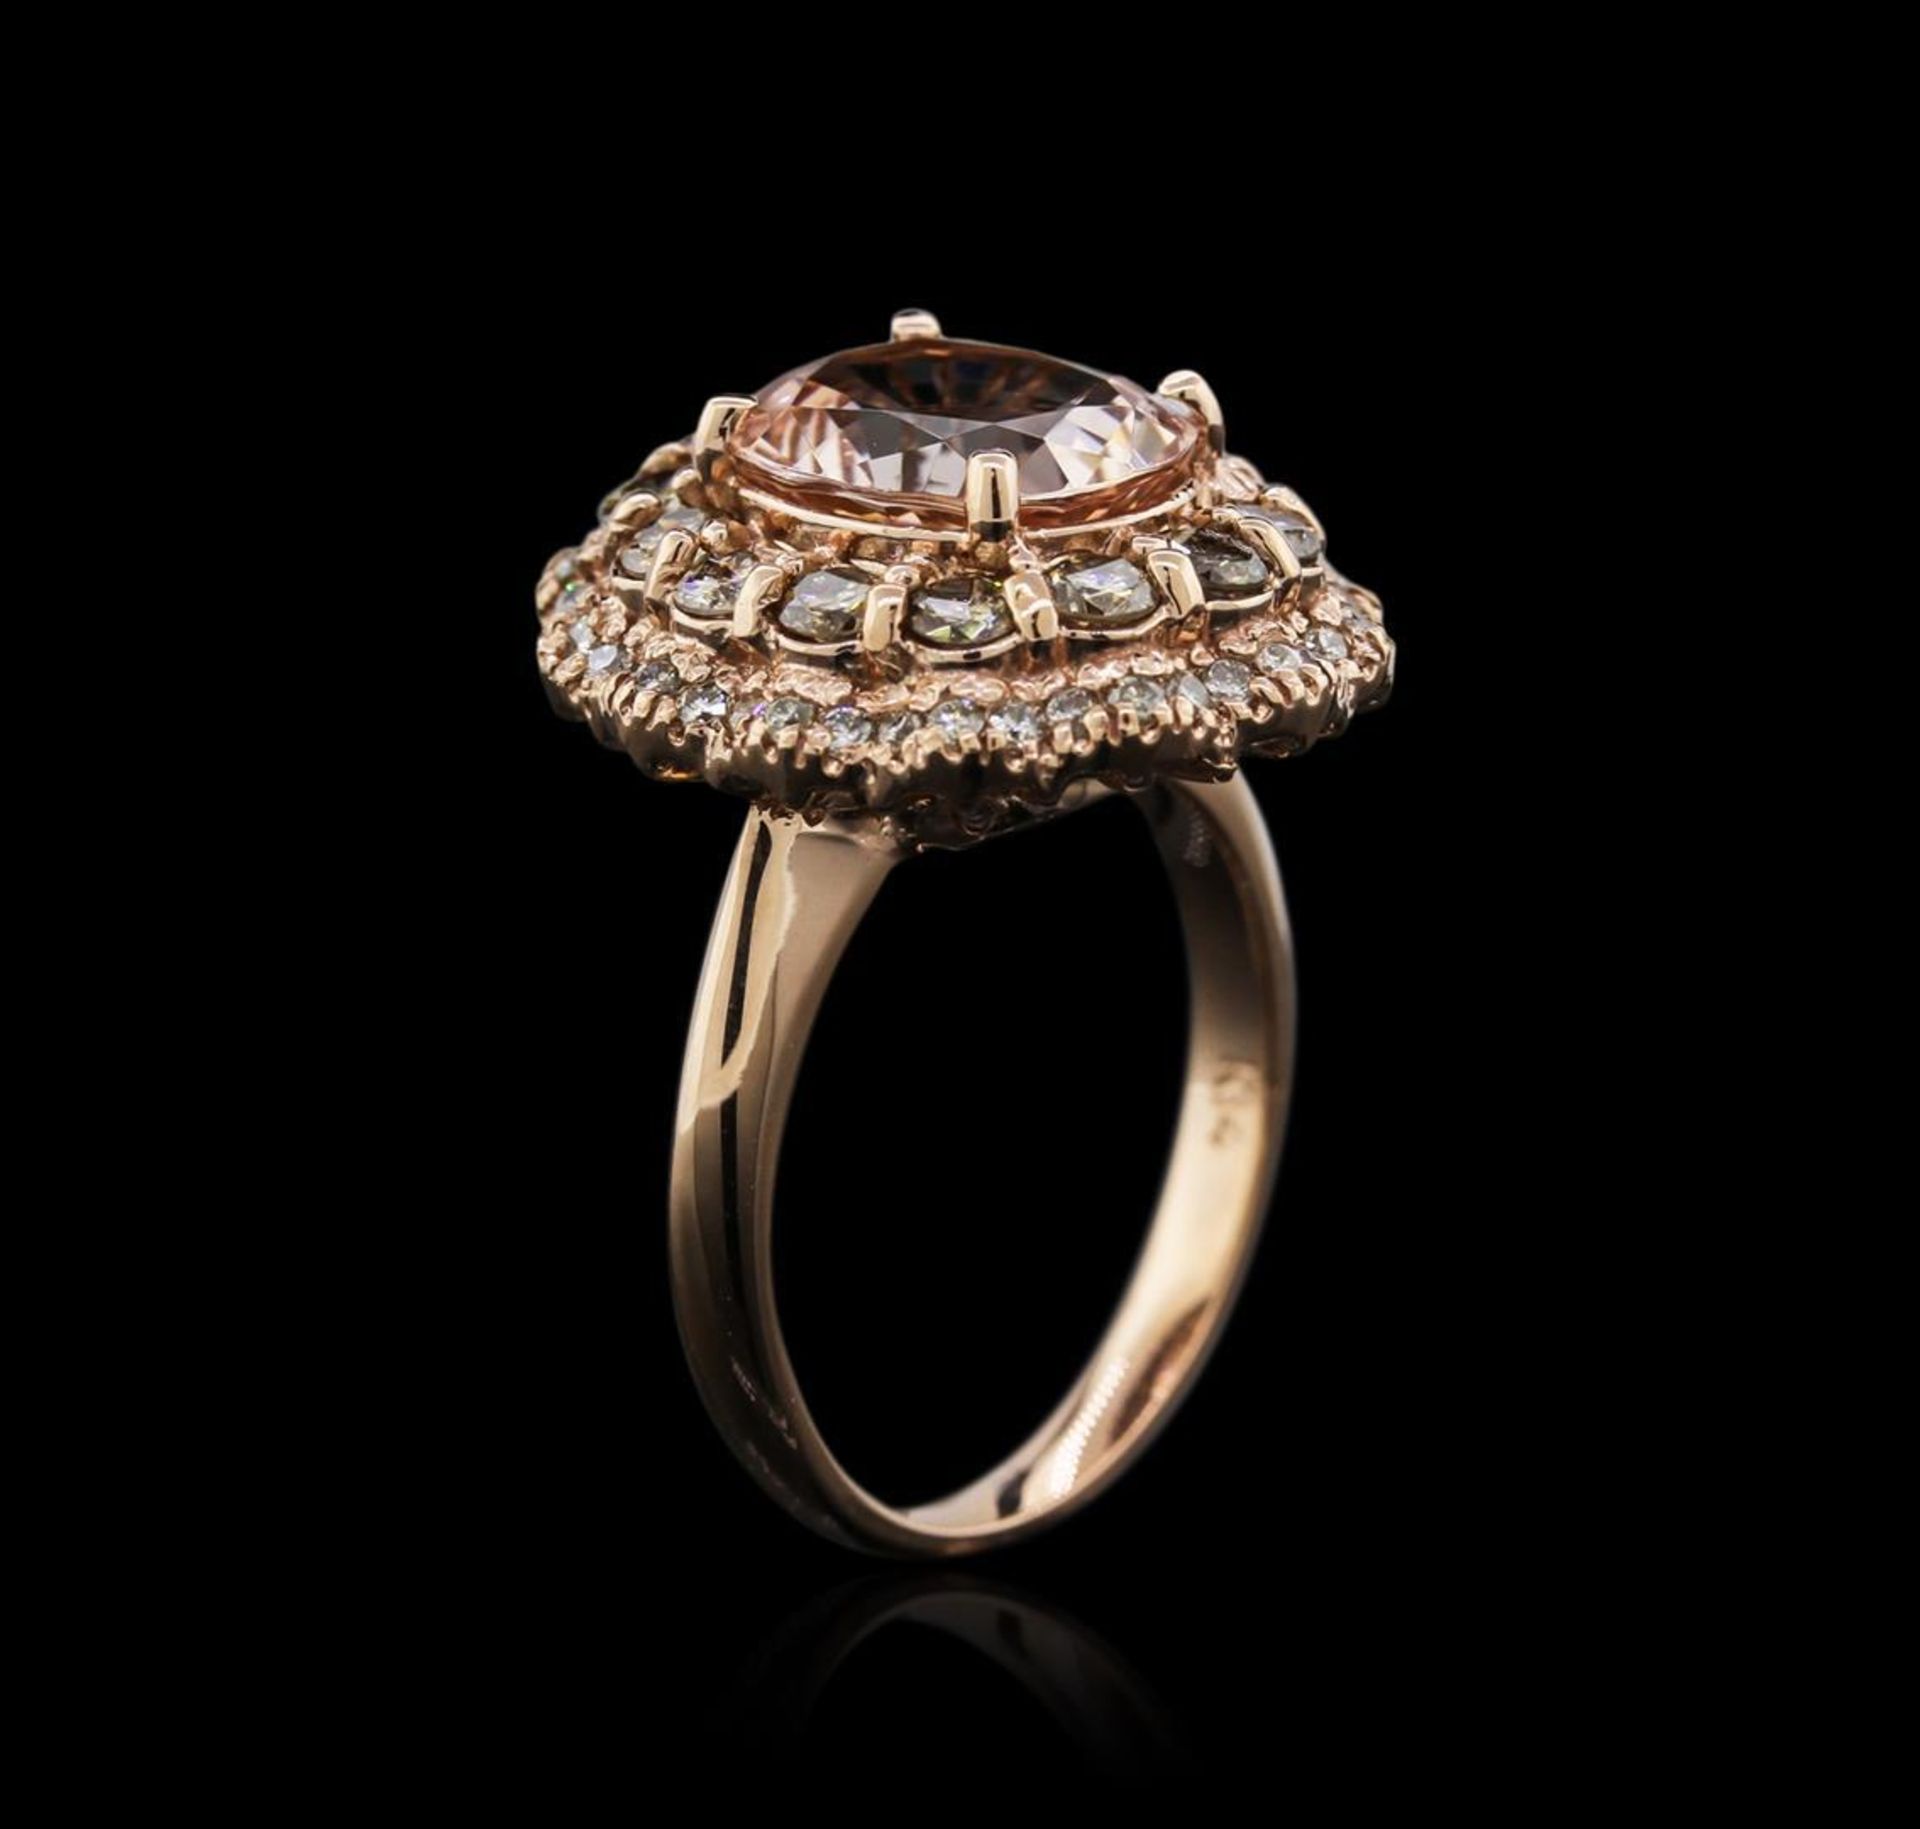 14KT Rose Gold 3.13 ctw Morganite and Diamond Ring - Image 3 of 4